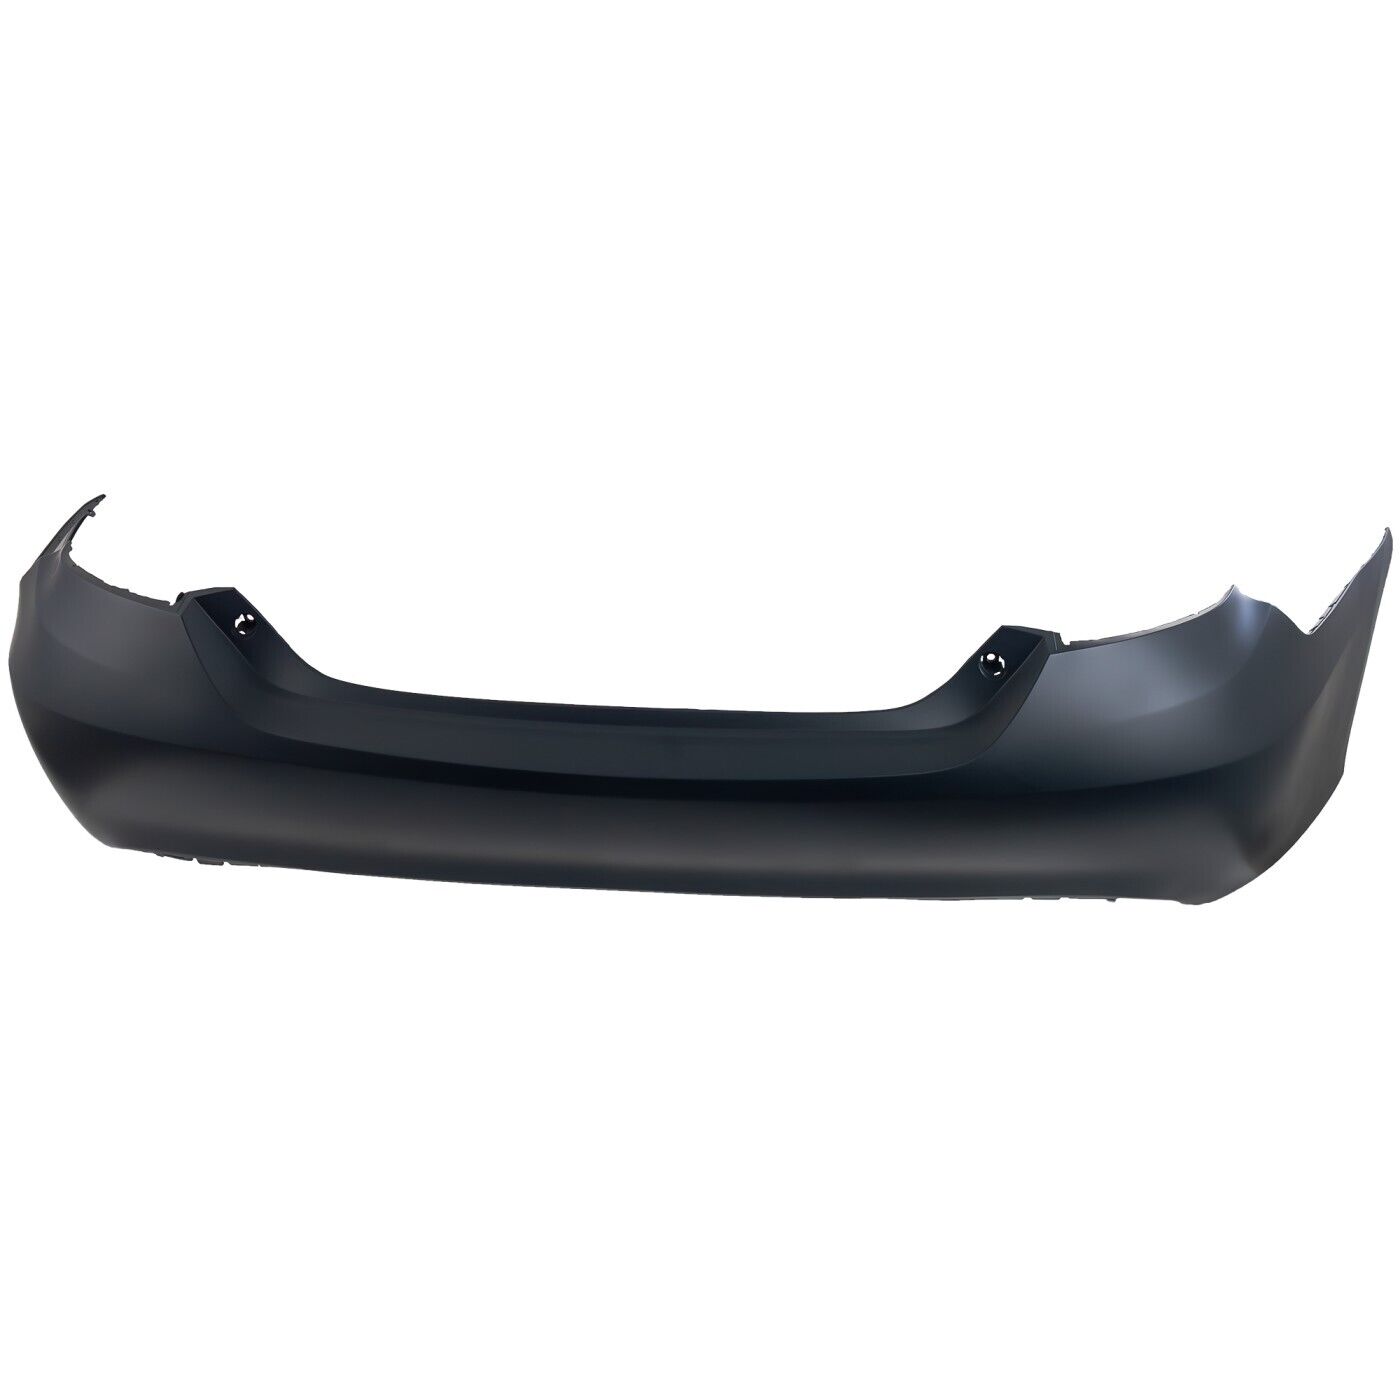 Rear Bumper Cover For 2015-2016 Toyota Camry Primed